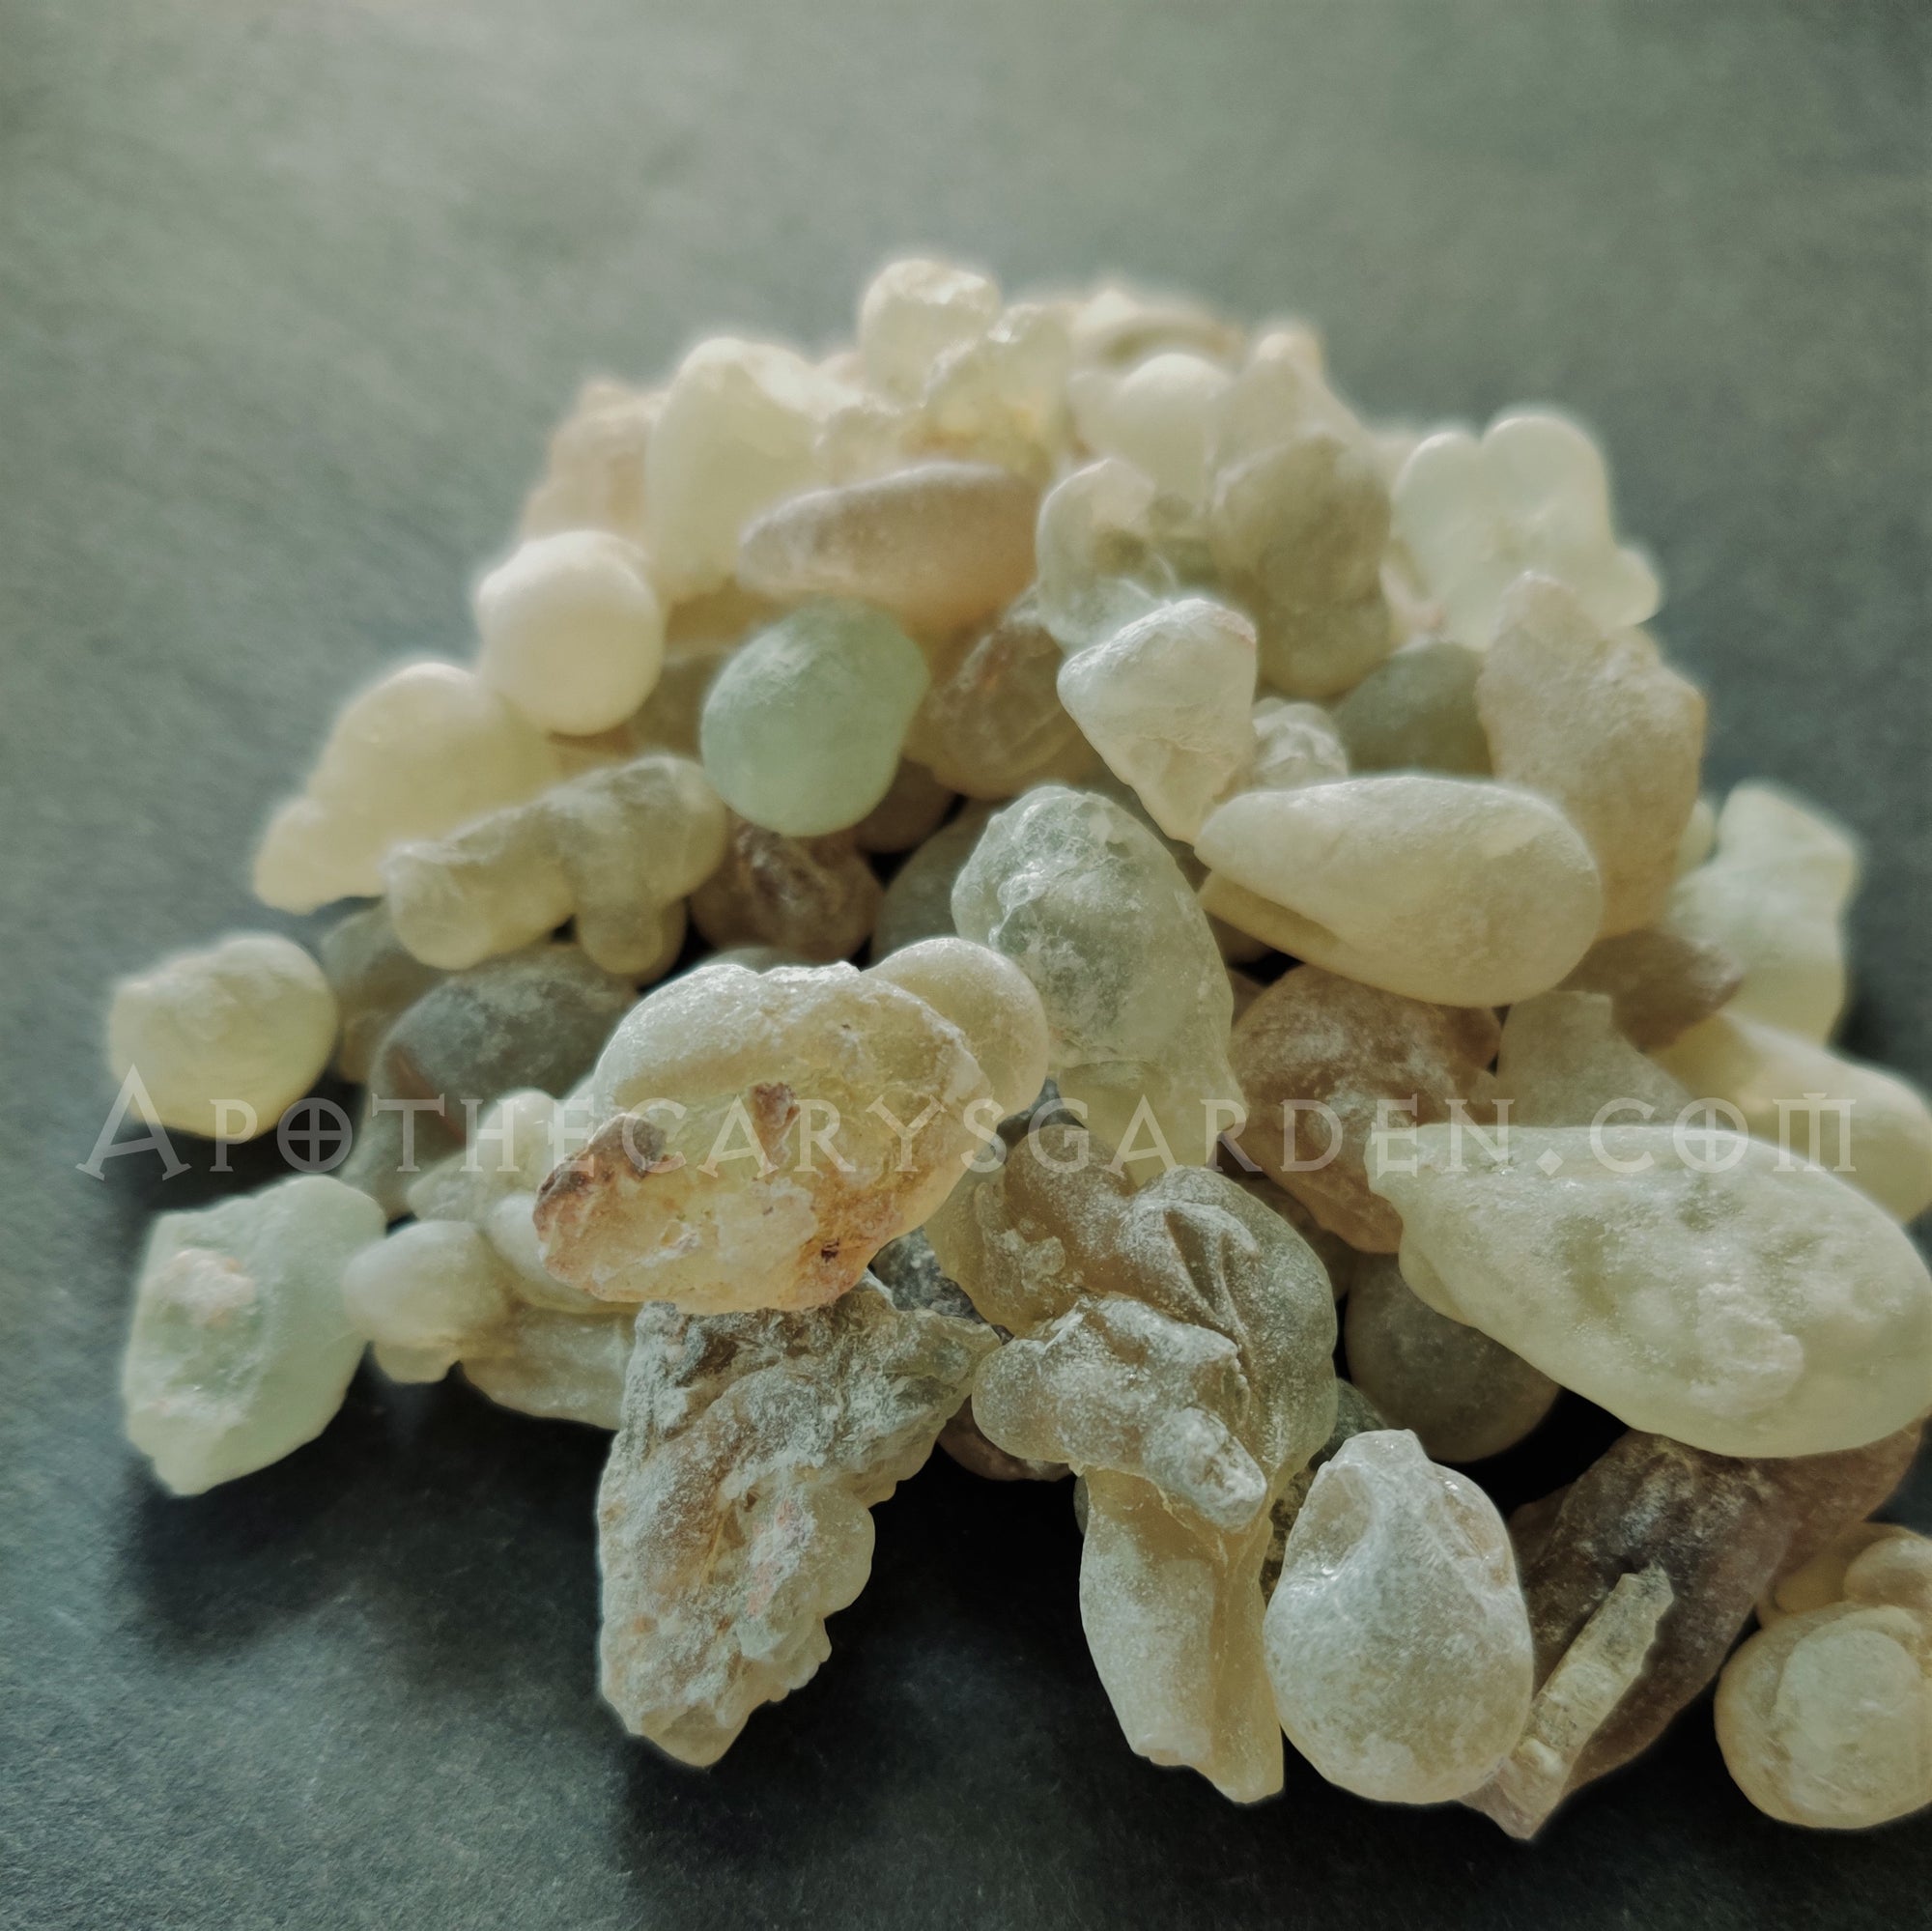 How to burn Frankincense and other aromatic resins